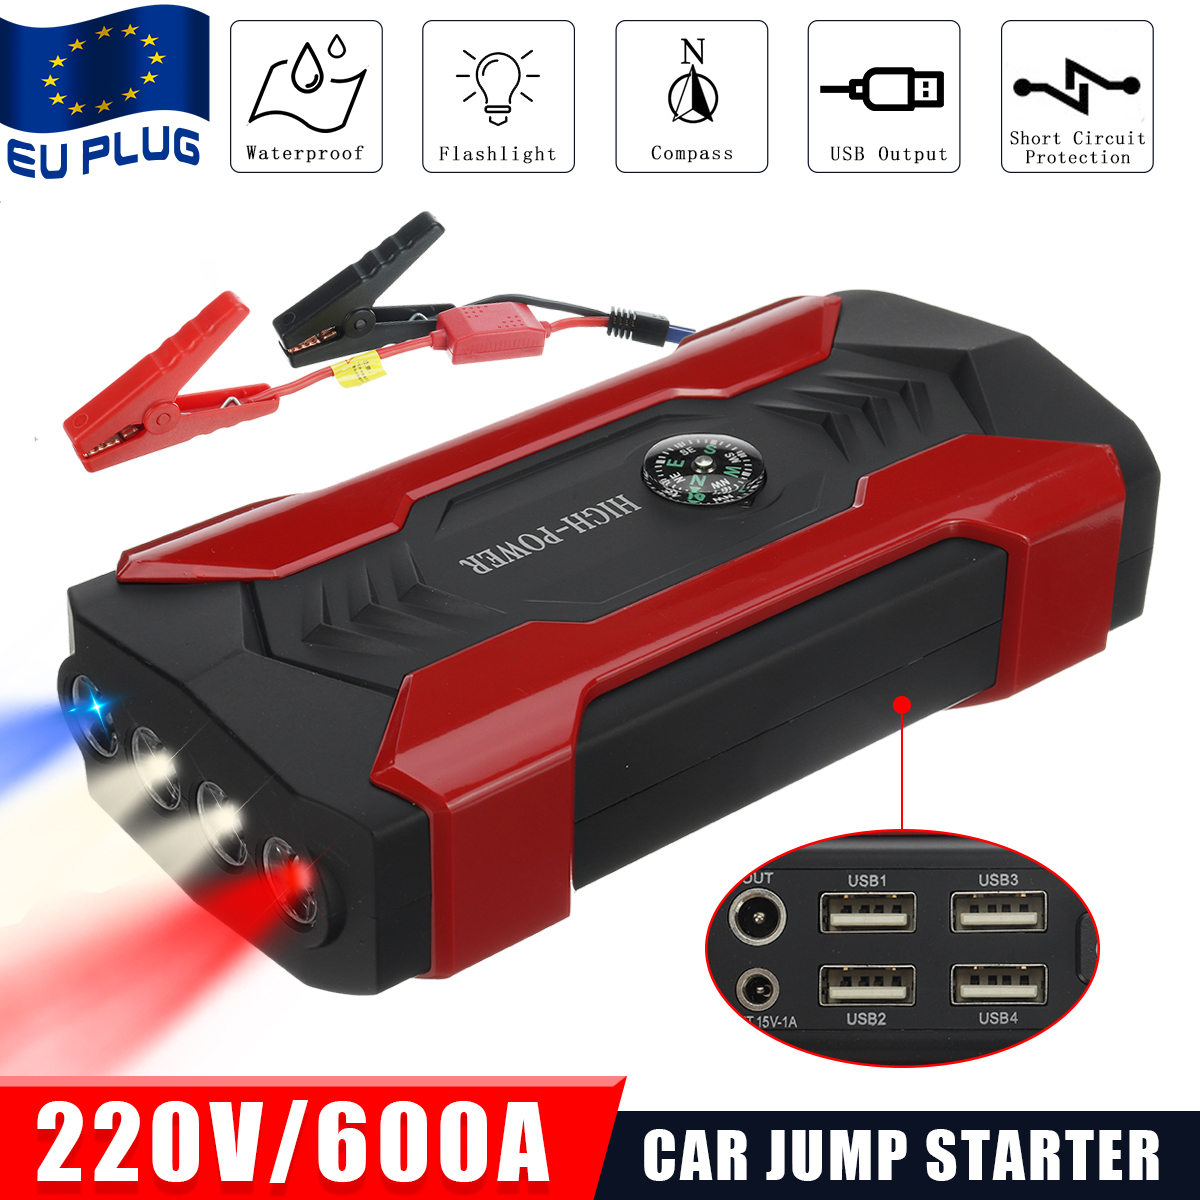 12V-Car-Jump-Starter-Battery-Booster-4USB-LED-Emergency-Auto-Quick-Charge-Power-Bank-1843625-2